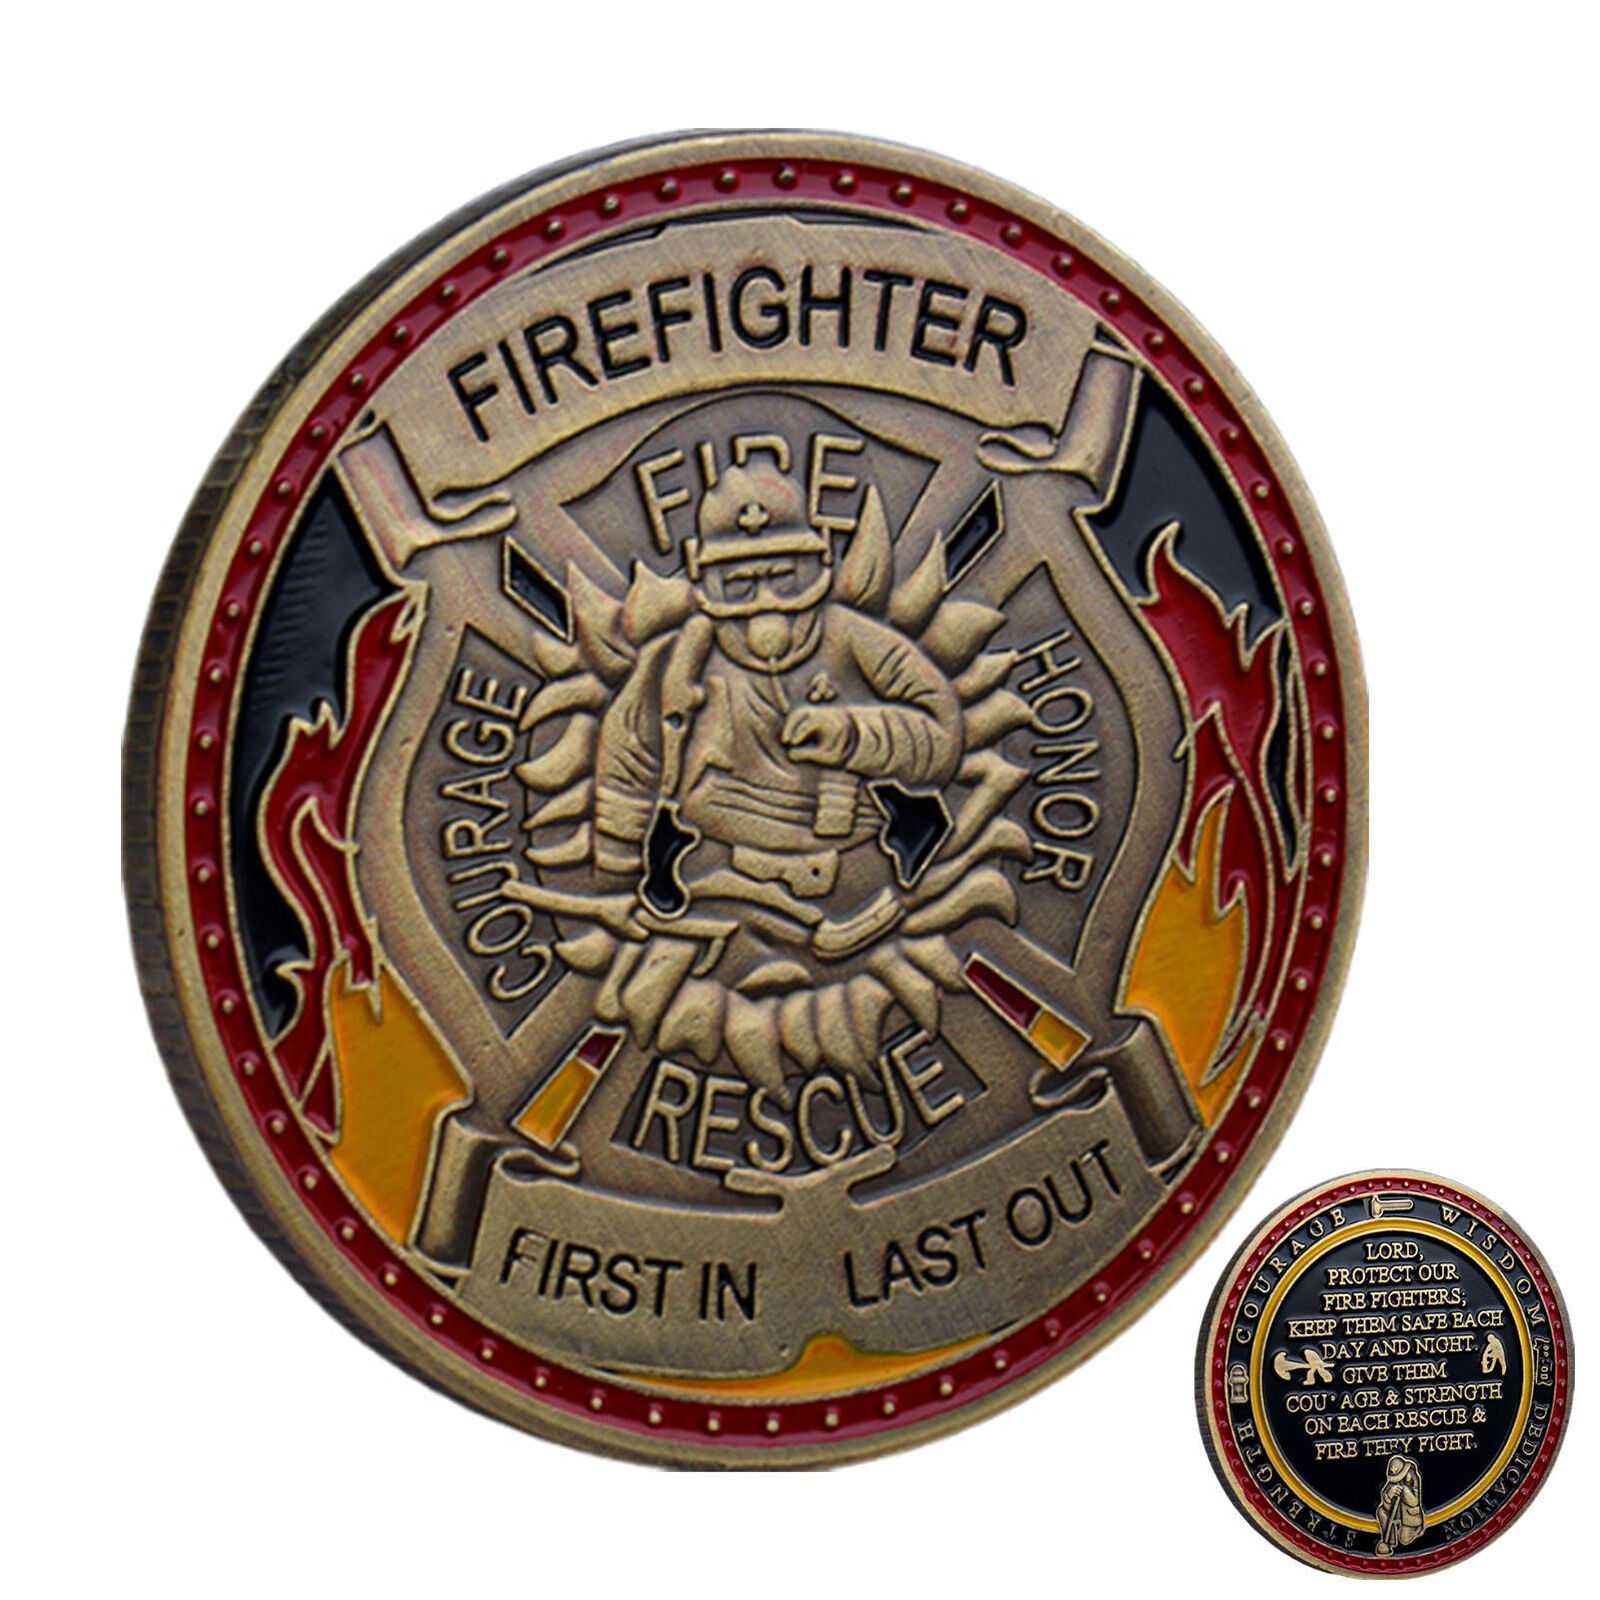 Firefighter's Prayer - Thin Red Line Challenge Coin - Thin Blue Line USA